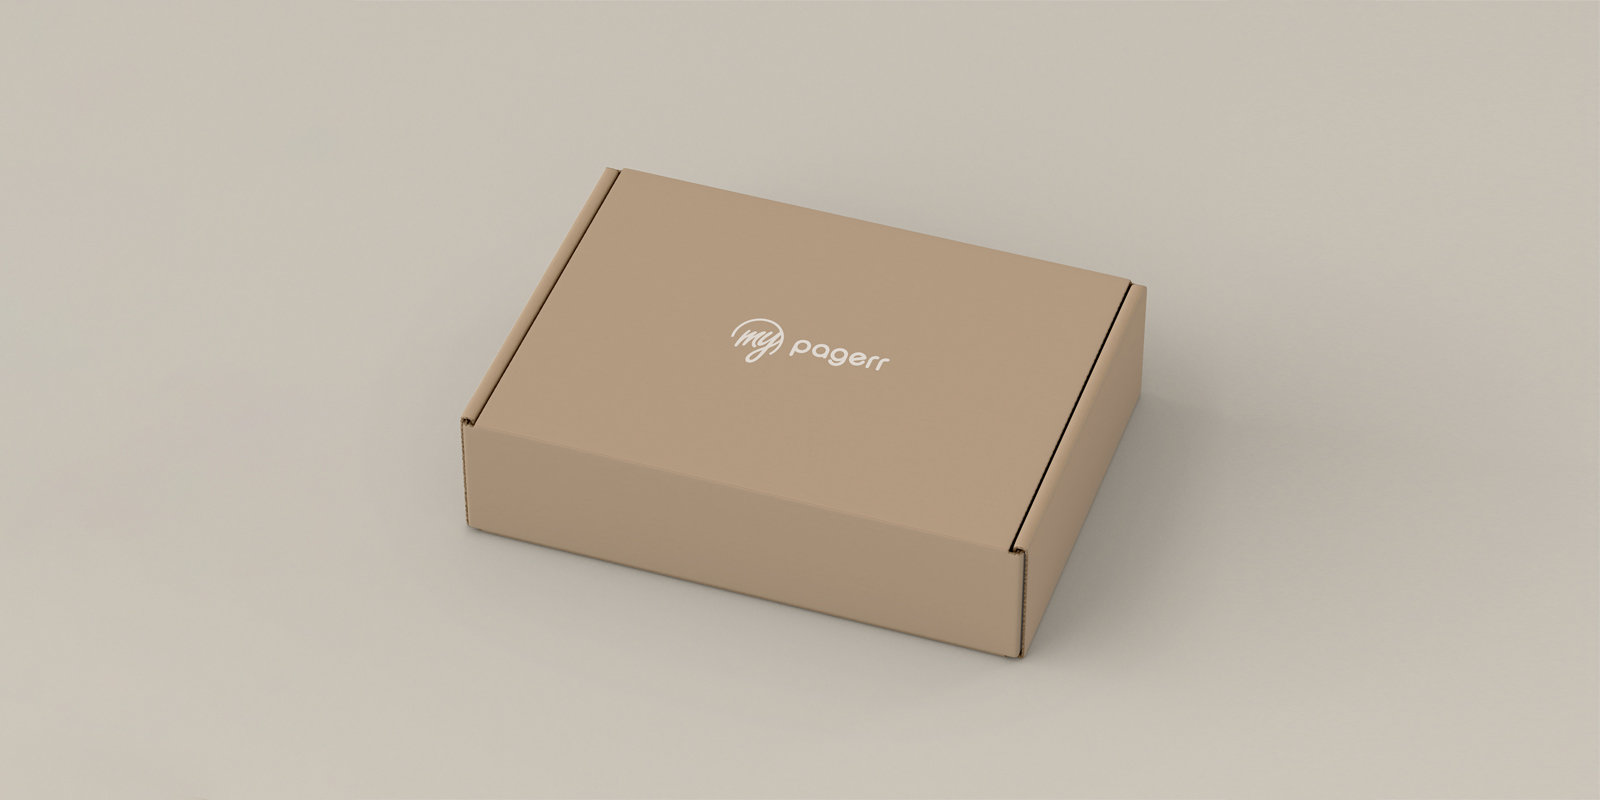 Bespoke boxes in Rockingham - Print with Pagerr